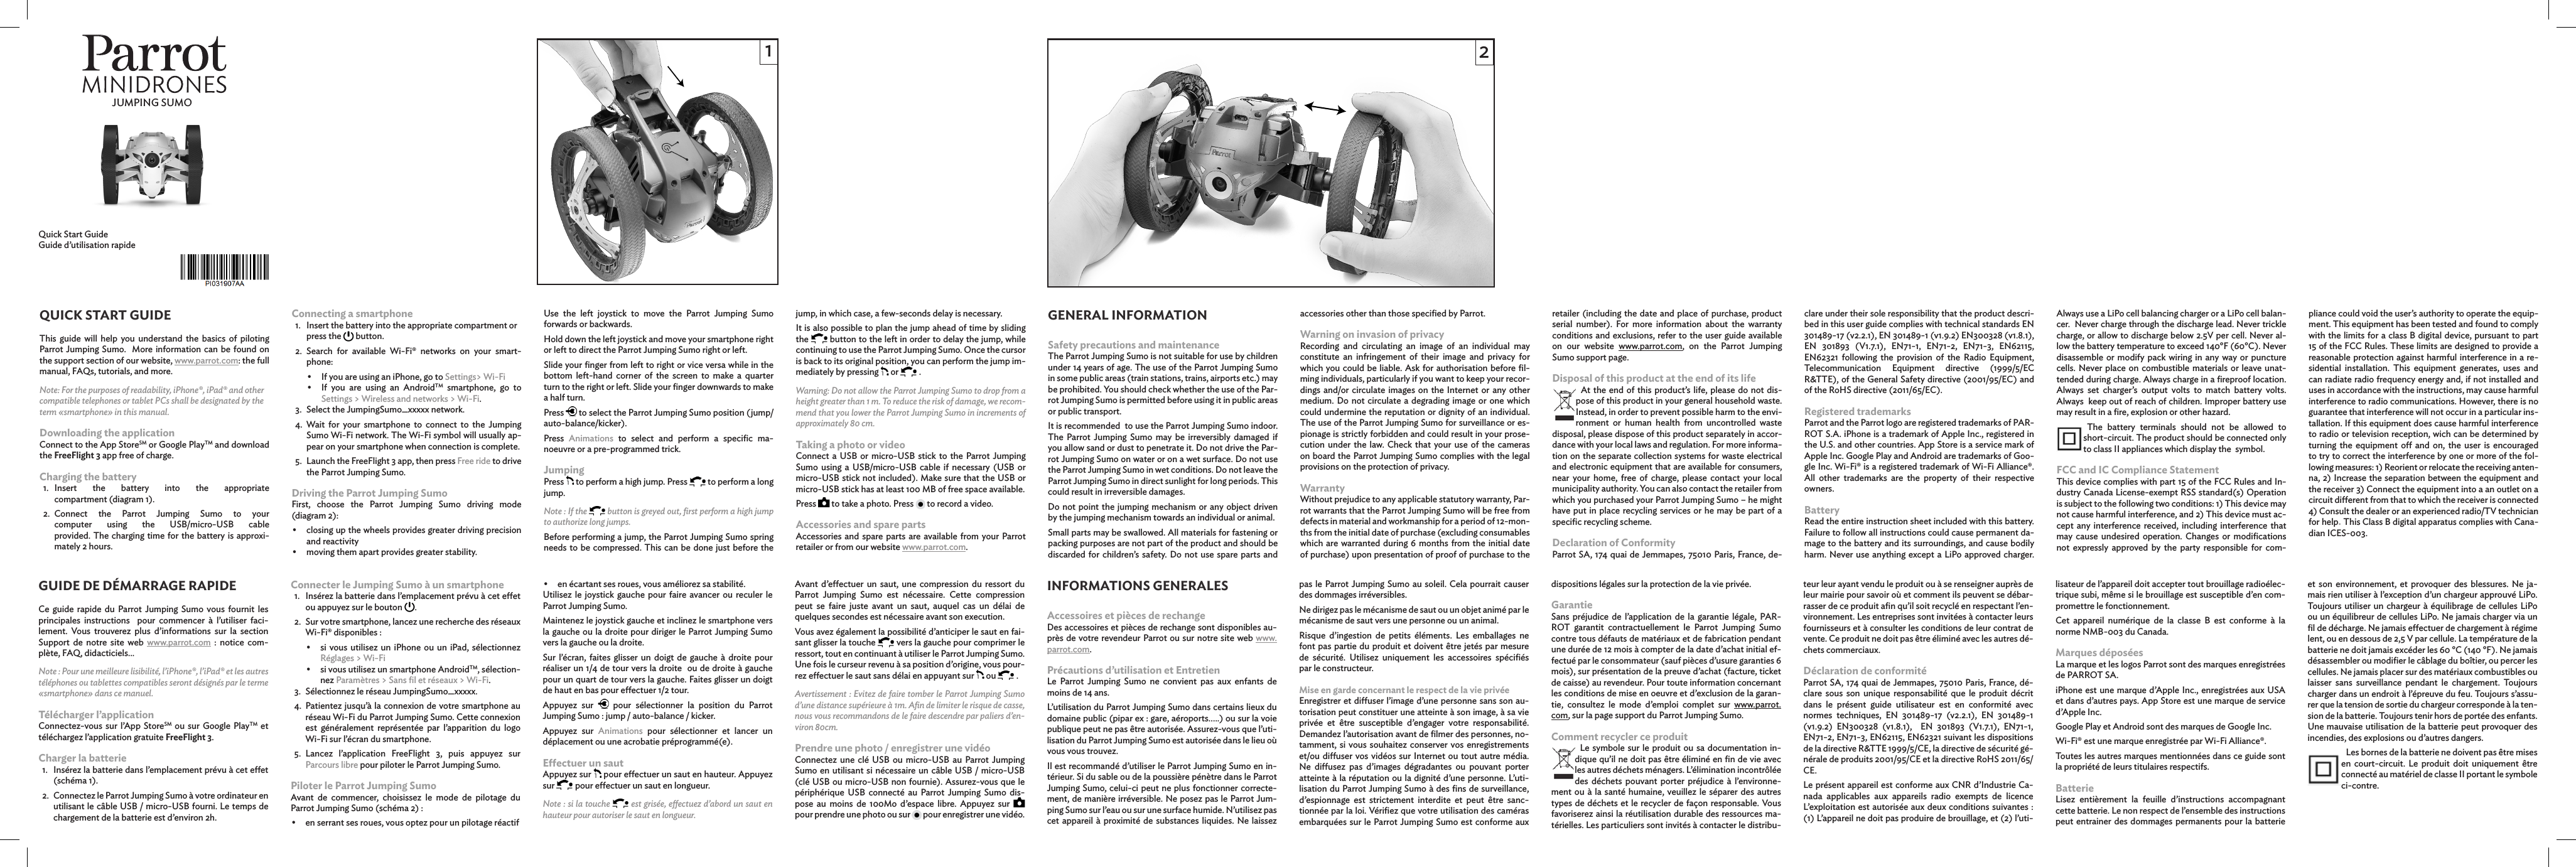  Quick Start Guide Guide d’utilisation rapideQUICK START GUIDEThis guide will help you understand the basics of piloting Parrot Jumping Sumo.  More information can be found on the support section of our website, www.parrot.com: the full manual, FAQs, tutorials, and more.Note: For the purposes of readability, iPhone®, iPad® and other compatible telephones or tablet PCs shall be designated by the term «smartphone» in this manual.Downloading the applicationConnect to the App StoreSM or Google PlayTM and download the FreeFlight 3 app free of charge.Charging the battery1.   Insert the battery into the appropriate  compartment (diagram 1).2.   Connect the Parrot Jumping Sumo to your  computer using the USB/micro-USB cable  provided. The charging time for the battery is approxi-mately 2 hours.Connecting a smartphone1.  Insert the battery into the appropriate compartment or press the   button.2.   Search for available Wi-Fi® networks on your smart-phone: •  If you are using an iPhone, go to Settings&gt; Wi-Fi •  If you are using an AndroidTM smartphone, go to  Settings &gt; Wireless and networks &gt; Wi-Fi.3.   Select the JumpingSumo_xxxxx network.4.   Wait for your smartphone to connect to the Jumping Sumo Wi-Fi network. The Wi-Fi symbol will usually ap-pear on your smartphone when connection is complete.5.   Launch the FreeFlight 3 app, then press Free ride to drive the Parrot Jumping Sumo.Driving the Parrot Jumping SumoFirst, choose the Parrot Jumping Sumo driving mode (diagram 2): •  closing up the wheels provides greater driving precision and reactivity•  moving them apart provides greater stability.Use the left joystick to move the Parrot Jumping Sumo forwards or backwards.Hold down the left joystick and move your smartphone right or left to direct the Parrot Jumping Sumo right or left.Slide your ﬁnger from left to right or vice versa while in the bottom left-hand corner of the screen to make a quarter turn to the right or left. Slide your ﬁnger downwards to make a half turn.Press   to select the Parrot Jumping Sumo position (jump/auto-balance/kicker).Press  Animations to select and perform a speciﬁc ma-noeuvre or a pre-programmed trick.JumpingPress   to perform a high jump. Press   to perform a long jump.Note : If the   button is greyed out, ﬁrst perform a high jump to authorize long jumps.Before performing a jump, the Parrot Jumping Sumo spring needs to be compressed. This can be done just before the jump, in which case, a few-seconds delay is necessary.It is also possible to plan the jump ahead of time by sliding the   button to the left in order to delay the jump, while continuing to use the Parrot Jumping Sumo. Once the cursor  is back to its original position, you can perform the jump im-mediately by pressing   or   . Warning: Do not allow the Parrot Jumping Sumo to drop from a height greater than 1 m. To reduce the risk of damage, we recom-mend that you lower the Parrot Jumping Sumo in increments of approximately 80 cm. Taking a photo or videoConnect a USB or micro-USB stick to the Parrot Jumping Sumo using a USB/micro-USB cable if necessary (USB or micro-USB stick not included). Make sure that the USB or micro-USB stick has at least 100 MB of free space available.Press   to take a photo. Press   to record a video. Accessories and spare partsAccessories and spare parts are available from your Parrot retailer or from our website www.parrot.com.GENERAL INFORMATIONSafety precautions and maintenanceThe Parrot Jumping Sumo is not suitable for use by children under 14 years of age. The use of the Parrot Jumping Sumo in some public areas (train stations, trains, airports etc.) may be prohibited. You should check whether the use of the Par-rot Jumping Sumo is permitted before using it in public areas or public transport. It is recommended  to use the Parrot Jumping Sumo indoor. The Parrot Jumping Sumo may be irreversibly damaged if you allow sand or dust to penetrate it. Do not drive the Par-rot Jumping Sumo on water or on a wet surface. Do not use the Parrot Jumping Sumo in wet conditions. Do not leave the Parrot Jumping Sumo in direct sunlight for long periods. This could result in irreversible damages.Do not point the jumping mechanism or any object driven by the jumping mechanism towards an individual or animal.Small parts may be swallowed. All materials for fastening or packing purposes are not part of the product and should be discarded for children’s safety. Do not use spare parts and accessories other than those speciﬁed by Parrot.Warning on invasion of privacyRecording and circulating an image of an individual may constitute an infringement of their image and privacy for which you could be liable. Ask for authorisation before ﬁl-ming individuals, particularly if you want to keep your recor-dings and/or circulate images on the Internet or any other medium. Do not circulate a degrading image or one which could undermine the reputation or dignity of an individual. The use of the Parrot Jumping Sumo for surveillance or es-pionage is strictly forbidden and could result in your prose-cution under the law. Check that your use of the cameras on board the Parrot Jumping Sumo complies with the legal provisions on the protection of privacy.WarrantyWithout prejudice to any applicable statutory warranty, Par-rot warrants that the Parrot Jumping Sumo will be free from defects in material and workmanship for a period of 12-mon-ths from the initial date of purchase (excluding consumables which are warranted during 6 months from the initial date of purchase) upon presentation of proof of purchase to the retailer (including the date and place of purchase, product serial number). For more information about the warranty conditions and exclusions, refer to the user guide available on our website www.parrot.com, on the Parrot Jumping Sumo support page.Disposal of this product at the end of its lifeAt the end of this product’s life, please do not dis-pose of this product in your general household waste. Instead, in order to prevent possible harm to the envi-ronment or human health from uncontrolled waste disposal, please dispose of this product separately in accor-dance with your local laws and regulation. For more informa-tion on the separate collection systems for waste electrical and electronic equipment that are available for consumers, near your home, free of charge, please contact your local municipality authority. You can also contact the retailer from which you purchased your Parrot Jumping Sumo – he might have put in place recycling services or he may be part of a speciﬁc recycling scheme.Declaration of ConformityParrot SA, 174 quai de Jemmapes, 75010 Paris, France, de-clare under their sole responsibility that the product descri-bed in this user guide complies with technical standards EN 301489-17 (v2.2.1), EN 301489-1 (v1.9.2) EN300328 (v1.8.1),  EN 301893 (V1.7.1), EN71-1, EN71-2, EN71-3, EN62115, EN62321 following the provision of the Radio Equipment, Telecommunication Equipment directive (1999/5/EC R&amp;TTE), of the General Safety directive (2001/95/EC) and of the RoHS directive (2011/65/EC).Registered trademarksParrot and the Parrot logo are registered trademarks of PAR-ROT S.A. iPhone is a trademark of Apple Inc., registered in the U.S. and other countries. App Store is a service mark of Apple Inc. Google Play and Android are trademarks of Goo-gle Inc. Wi-Fi® is a registered trademark of Wi-Fi Alliance®. All other trademarks are the property of their respective owners. BatteryRead the entire instruction sheet included with this battery. Failure to follow all instructions could cause permanent da-mage to the battery and its surroundings, and cause bodily harm. Never use anything except a LiPo approved charger. Always use a LiPo cell balancing charger or a LiPo cell balan-cer.  Never charge through the discharge lead. Never trickle charge, or allow to discharge below 2.5V per cell. Never al-low the battery temperature to exceed 140°F (60°C). Never disassemble or modify pack wiring in any way or puncture cells. Never place on combustible materials or leave unat-tended during charge. Always charge in a ﬁreproof location. Always set charger’s output volts to match battery volts. Always  keep out of reach of children. Improper battery use may result in a ﬁre, explosion or other hazard.The battery terminals should not be allowed to short-circuit. The product should be connected only to class II appliances which display the  symbol.FCC and IC Compliance StatementThis device complies with part 15 of the FCC Rules and In-dustry Canada License-exempt RSS standard(s) Operation is subject to the following two conditions: 1) This device may not cause harmful interference, and 2) This device must ac-cept any interference received, including interference that may cause undesired operation. Changes or modiﬁcations not expressly approved by the party responsible for com-GUIDE DE DÉMARRAGE RAPIDECe guide rapide du Parrot Jumping Sumo vous fournit les principales instructions  pour commencer à l’utiliser faci-lement. Vous trouverez plus d’informations sur la section  Support de notre site web www.parrot.com : notice com-plète, FAQ, didacticiels...Note : Pour une meilleure lisibilité, l’iPhone®, l’iPad® et les autres téléphones ou tablettes compatibles seront désignés par le terme «smartphone» dans ce manuel.Télécharger l’applicationConnectez-vous sur l’App StoreSM ou sur Google PlayTM et téléchargez l’application gratuite FreeFlight 3.Charger la batterie1.  Insérez la batterie dans l’emplacement prévu à cet eet (schéma 1).2.  Connectez le Parrot Jumping Sumo à votre ordinateur en utilisant le câble USB / micro-USB fourni. Le temps de chargement de la batterie est d’environ 2h.Connecter le Jumping Sumo à un smartphone1.  Insérez la batterie dans l’emplacement prévu à cet eet ou appuyez sur le bouton  .2.  Sur votre smartphone, lancez une recherche des réseaux Wi-Fi® disponibles : •   si vous utilisez un iPhone ou un iPad, sélectionnez Réglages &gt; Wi-Fi •  si vous utilisez un smartphone AndroidTM, sélection-nez Paramètres &gt; Sans ﬁl et réseaux &gt; Wi-Fi.3.  Sélectionnez le réseau JumpingSumo_xxxxx.4.  Patientez jusqu’à la connexion de votre smartphone au réseau Wi-Fi du Parrot Jumping Sumo. Cette connexion est généralement représentée par l’apparition du logo Wi-Fi sur l’écran du smartphone.5.  Lancez l’application FreeFlight 3, puis appuyez sur  Parcours libre pour piloter le Parrot Jumping Sumo.Piloter le Parrot Jumping SumoAvant de commencer, choisissez le mode de pilotage du  Parrot Jumping Sumo (schéma 2) : •  en serrant ses roues, vous optez pour un pilotage réactif•  en écartant ses roues, vous améliorez sa stabilité.Utilisez le joystick gauche pour faire avancer ou reculer le Parrot Jumping Sumo.Maintenez le joystick gauche et inclinez le smartphone vers la gauche ou la droite pour diriger le Parrot Jumping Sumo vers la gauche ou la droite.Sur l’écran, faites glisser un doigt de gauche à droite pour réaliser un 1/4 de tour vers la droite  ou de droite à gauche pour un quart de tour vers la gauche. Faites glisser un doigt de haut en bas pour eectuer 1/2 tour.Appuyez sur   pour sélectionner la position du Parrot  Jumping Sumo : jump / auto-balance / kicker.Appuyez sur Animations pour sélectionner et lancer un  déplacement ou une acrobatie préprogrammé(e).Eectuer un sautAppuyez sur   pour eectuer un saut en hauteur. Appuyez sur   pour eectuer un saut en longueur.Note : si la touche   est grisée, eectuez d’abord un saut en  hauteur pour autoriser le saut en longueur.Avant d’eectuer un saut, une compression du ressort du Parrot Jumping Sumo est nécessaire. Cette compression peut se faire juste avant un saut, auquel cas un délai de quelques secondes est nécessaire avant son execution. Vous avez également la possibilité d’anticiper le saut en fai-sant glisser la touche   vers la gauche pour comprimer le ressort, tout en continuant à utiliser le Parrot Jumping Sumo. Une fois le curseur revenu à sa position d’origine, vous pour-rez eectuer le saut sans délai en appuyant sur   ou   . Avertissement : Evitez de faire tomber le Parrot Jumping Sumo d’une distance supérieure à 1m. Aﬁn de limiter le risque de casse, nous vous recommandons de le faire descendre par paliers d’en-viron 80cm. Prendre une photo / enregistrer une vidéoConnectez une clé USB ou micro-USB au Parrot Jumping Sumo en utilisant si nécessaire un câble USB / micro-USB (clé USB ou micro-USB non fournie). Assurez-vous que le périphérique USB connecté au Parrot Jumping Sumo dis-pose au moins de 100Mo d’espace libre. Appuyez sur   pour prendre une photo ou sur   pour enregistrer une vidéo. INFORMATIONS GENERALESAccessoires et pièces de rechangeDes accessoires et pièces de rechange sont disponibles au-près de votre revendeur Parrot ou sur notre site web www.parrot.com.Précautions d’utilisation et EntretienLe Parrot Jumping Sumo ne convient pas aux enfants de moins de 14 ans.L’utilisation du Parrot Jumping Sumo dans certains lieux du domaine public (pipar ex : gare, aéroports…..) ou sur la voie publique peut ne pas être autorisée. Assurez-vous que l’uti-lisation du Parrot Jumping Sumo est autorisée dans le lieu où vous vous trouvez.Il est recommandé d’utiliser le Parrot Jumping Sumo en in-térieur. Si du sable ou de la poussière pénètre dans le Parrot Jumping Sumo, celui-ci peut ne plus fonctionner correcte-ment, de manière irréversible. Ne posez pas le Parrot Jum-ping Sumo sur l’eau ou sur une surface humide. N’utilisez pas cet appareil à proximité de substances liquides. Ne laissez pas le Parrot Jumping Sumo au soleil. Cela pourrait causer des dommages irréversibles.Ne dirigez pas le mécanisme de saut ou un objet animé par le mécanisme de saut vers une personne ou un animal.Risque d’ingestion de petits éléments. Les emballages ne font pas partie du produit et doivent être jetés par mesure de sécurité. Utilisez uniquement les accessoires spéciﬁés par le constructeur. Mise en garde concernant le respect de la vie privéeEnregistrer et diuser l’image d’une personne sans son au-torisation peut constituer une atteinte à son image, à sa vie privée et être susceptible d’engager votre responsabilité. Demandez l’autorisation avant de ﬁlmer des personnes, no-tamment, si vous souhaitez conserver vos enregistrements et/ou diuser vos vidéos sur Internet ou tout autre média. Ne diusez pas d’images dégradantes ou pouvant porter atteinte à la réputation ou la dignité d’une personne. L’uti-lisation du Parrot Jumping Sumo à des ﬁns de surveillance, d’espionnage est strictement interdite et peut être sanc-tionnée par la loi. Vériﬁez que votre utilisation des caméras embarquées sur le Parrot Jumping Sumo est conforme aux dispositions légales sur la protection de la vie privée.GarantieSans préjudice de l’application de la garantie légale, PAR-ROT garantit contractuellement le Parrot Jumping Sumo contre tous défauts de matériaux et de fabrication pendant une durée de 12 mois à compter de la date d’achat initial ef-fectué par le consommateur (sauf pièces d’usure garanties 6 mois), sur présentation de la preuve d’achat (facture, ticket de caisse) au revendeur. Pour toute information concernant les conditions de mise en oeuvre et d’exclusion de la garan-tie, consultez le mode d’emploi complet sur www.parrot.com, sur la page support du Parrot Jumping Sumo.Comment recycler ce produitLe symbole sur le produit ou sa documentation in-dique qu’il ne doit pas être éliminé en ﬁn de vie avec les autres déchets ménagers. L’élimination incontrôlée des déchets pouvant porter préjudice à l’environne-ment ou à la santé humaine, veuillez le séparer des autres types de déchets et le recycler de façon responsable. Vous favoriserez ainsi la réutilisation durable des ressources ma-térielles. Les particuliers sont invités à contacter le distribu-teur leur ayant vendu le produit ou à se renseigner auprès de leur mairie pour savoir où et comment ils peuvent se débar-rasser de ce produit aﬁn qu’il soit recyclé en respectant l’en-vironnement. Les entreprises sont invitées à contacter leurs fournisseurs et à consulter les conditions de leur contrat de vente. Ce produit ne doit pas être éliminé avec les autres dé-chets commerciaux.Déclaration de conformitéParrot SA, 174 quai de Jemmapes, 75010 Paris, France, dé-clare sous son unique responsabilité que le produit décrit dans le présent guide utilisateur est en conformité avec normes techniques, EN 301489-17 (v2.2.1), EN 301489-1 (v1.9.2) EN300328 (v1.8.1),  EN 301893 (V1.7.1), EN71-1, EN71-2, EN71-3, EN62115, EN62321 suivant les dispositions de la directive R&amp;TTE 1999/5/CE, la directive de sécurité gé-nérale de produits 2001/95/CE et la directive RoHS 2011/65/CE. Le présent appareil est conforme aux CNR d’Industrie Ca-nada applicables aux appareils radio exempts de licence L’exploitation est autorisée aux deux conditions suivantes : (1) L’appareil ne doit pas produire de brouillage, et (2) l’uti-lisateur de l’appareil doit accepter tout brouillage radioélec-trique subi, même si le brouillage est susceptible d’en com-promettre le fonctionnement.Cet appareil numérique de la classe B est conforme à la norme NMB-003 du Canada.Marques déposéesLa marque et les logos Parrot sont des marques enregistrées de PARROT SA. iPhone est une marque d’Apple Inc., enregistrées aux USA et dans d’autres pays. App Store est une marque de service d’Apple Inc. Google Play et Android sont des marques de Google Inc.Wi-Fi® est une marque enregistrée par Wi-Fi Alliance®.Toutes les autres marques mentionnées dans ce guide sont la propriété de leurs titulaires respectifs.BatterieLisez entièrement la feuille d’instructions accompagnant cette batterie. Le non respect de l’ensemble des instructions peut entrainer des dommages permanents pour la batterie pliance could void the user’s authority to operate the equip-ment. This equipment has been tested and found to comply with the limits for a class B digital device, pursuant to part 15 of the FCC Rules. These limits are designed to provide a reasonable protection against harmful interference in a re-sidential installation. This equipment generates, uses and can radiate radio frequency energy and, if not installed and uses in accordance with the instructions, may cause harmful interference to radio communications. However, there is no guarantee that interference will not occur in a particular ins-tallation. If this equipment does cause harmful interference to radio or television reception, wich can be determined by turning the equipment o and on, the user is encouraged to try to correct the interference by one or more of the fol-lowing measures: 1) Reorient or relocate the receiving anten-na, 2) Increase the separation between the equipment and the receiver 3) Connect the equipment into a an outlet on a circuit dierent from that to which the receiver is connected 4) Consult the dealer or an experienced radio/TV technician for help. This Class B digital apparatus complies with Cana-dian ICES-003.et son environnement, et provoquer des blessures. Ne ja-mais rien utiliser à l’exception d’un chargeur approuvé LiPo. Toujours utiliser un chargeur à équilibrage de cellules LiPo ou un équilibreur de cellules LiPo. Ne jamais charger via un ﬁl de décharge. Ne jamais eectuer de chargement à régime lent, ou en dessous de 2,5 V par cellule. La température de la batterie ne doit jamais excéder les 60 °C (140 °F). Ne jamais désassembler ou modiﬁer le câblage du boîtier, ou percer les cellules. Ne jamais placer sur des matériaux combustibles ou laisser sans surveillance pendant le chargement. Toujours charger dans un endroit à l’épreuve du feu. Toujours s’assu-rer que la tension de sortie du chargeur corresponde à la ten-sion de la batterie. Toujours tenir hors de portée des enfants. Une mauvaise utilisation de la batterie peut provoquer des incendies, des explosions ou d’autres dangers.Les bornes de la batterie ne doivent pas être mises en court-circuit. Le produit doit uniquement être connecté au matériel de classe II portant le symbole  ci-contre.JUMPING SUMO12